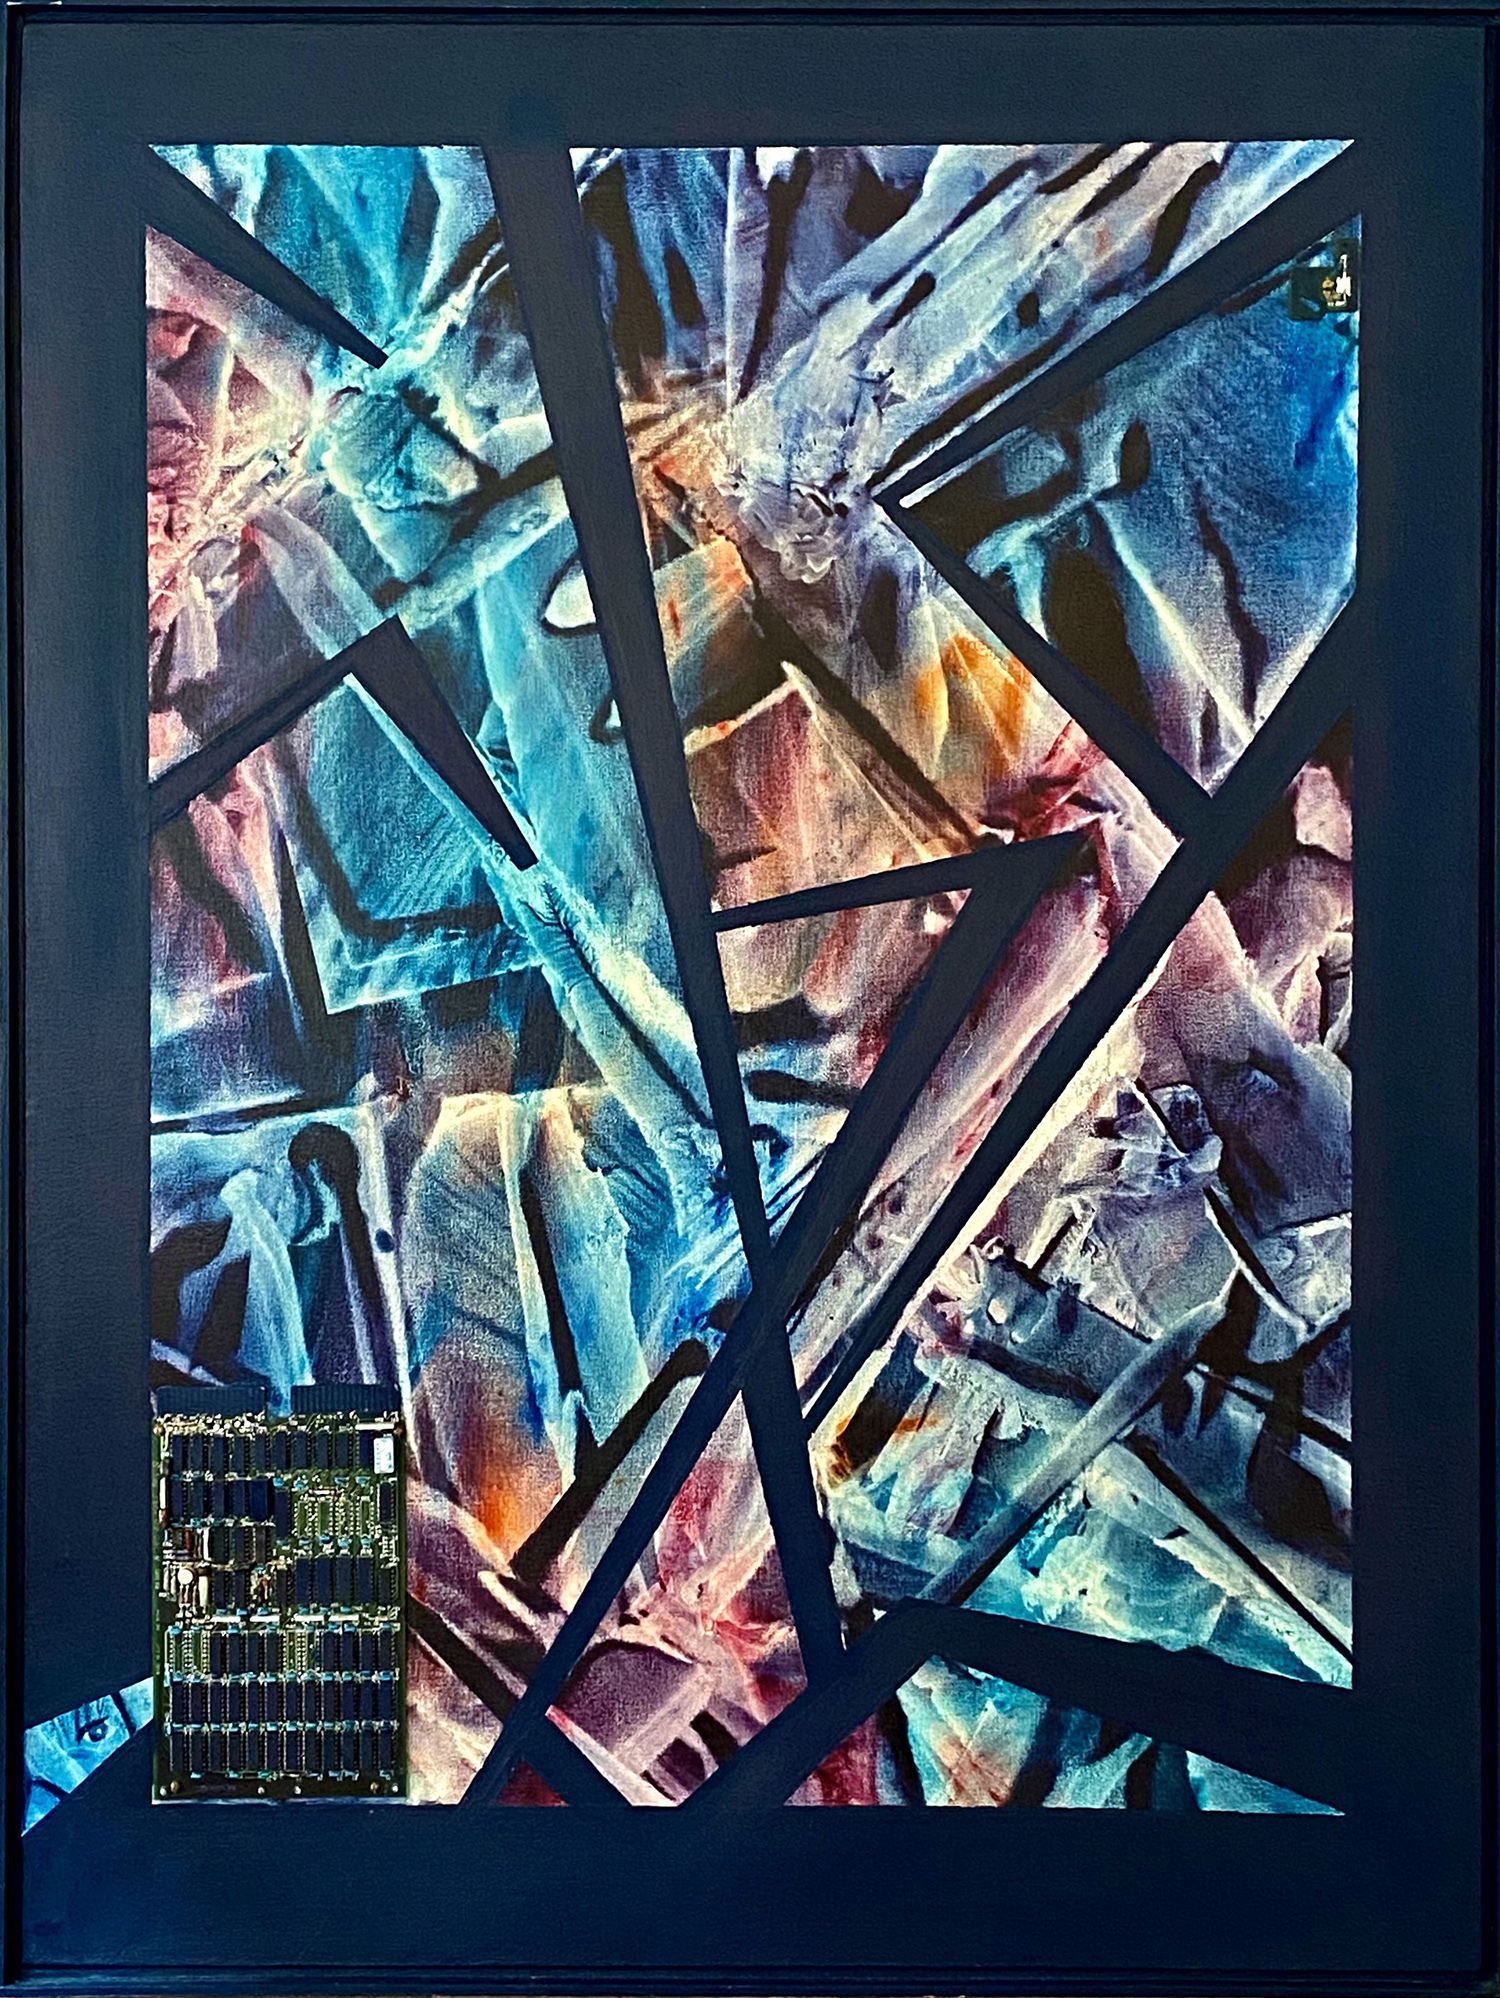 Short Circuit, 1990 / 1993. Oil and circuit board on canvas, 40 x 30 in.